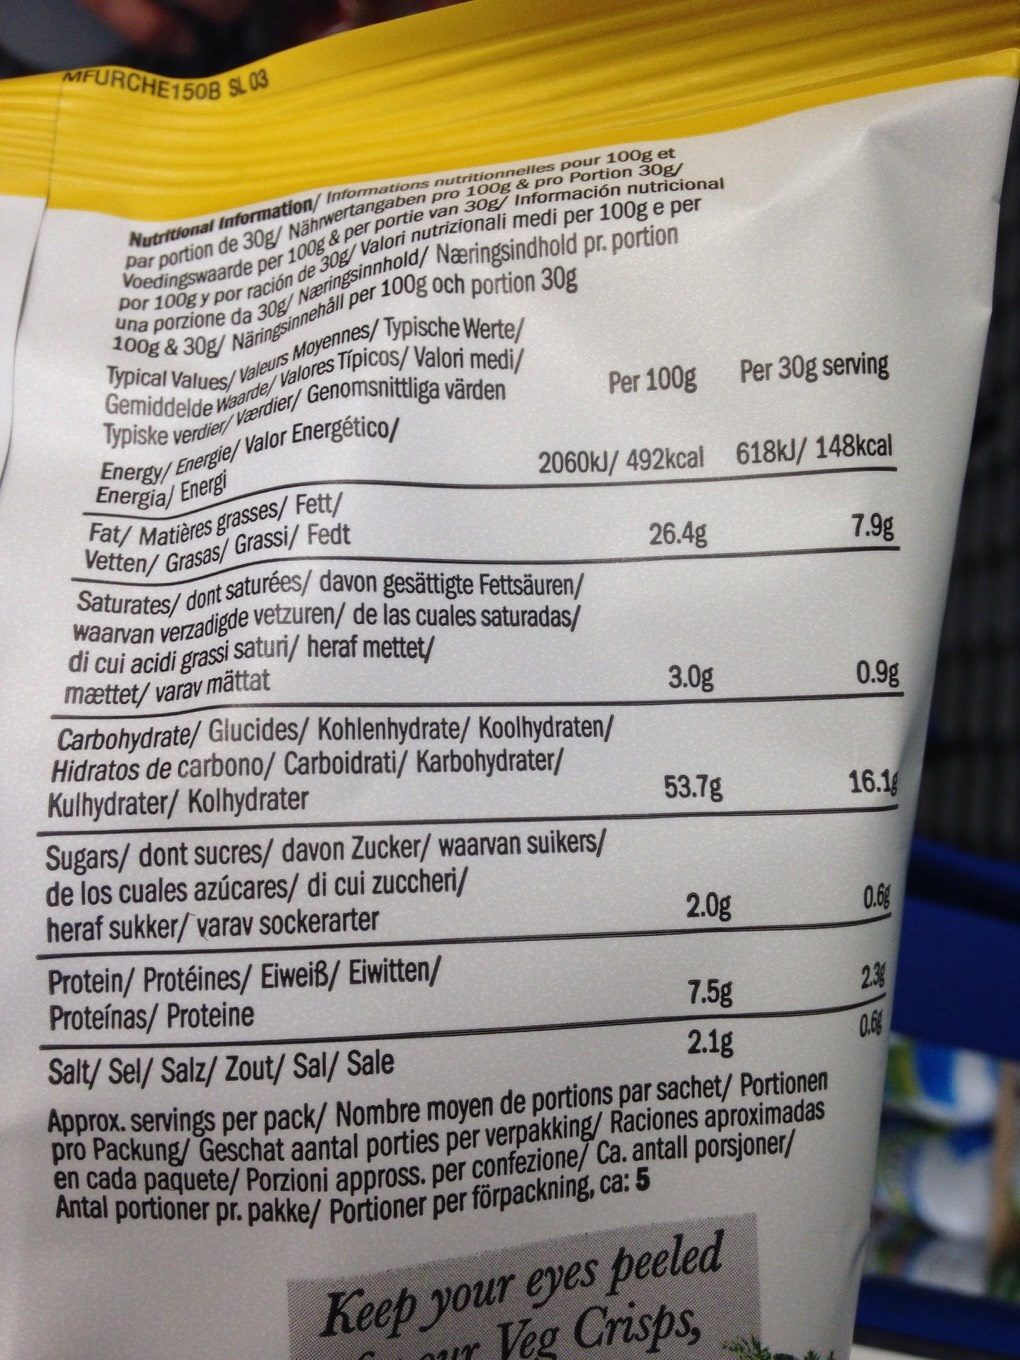 Mature Cheddar Cheese & Pickled Onions Furrows - Nutrition facts - fr